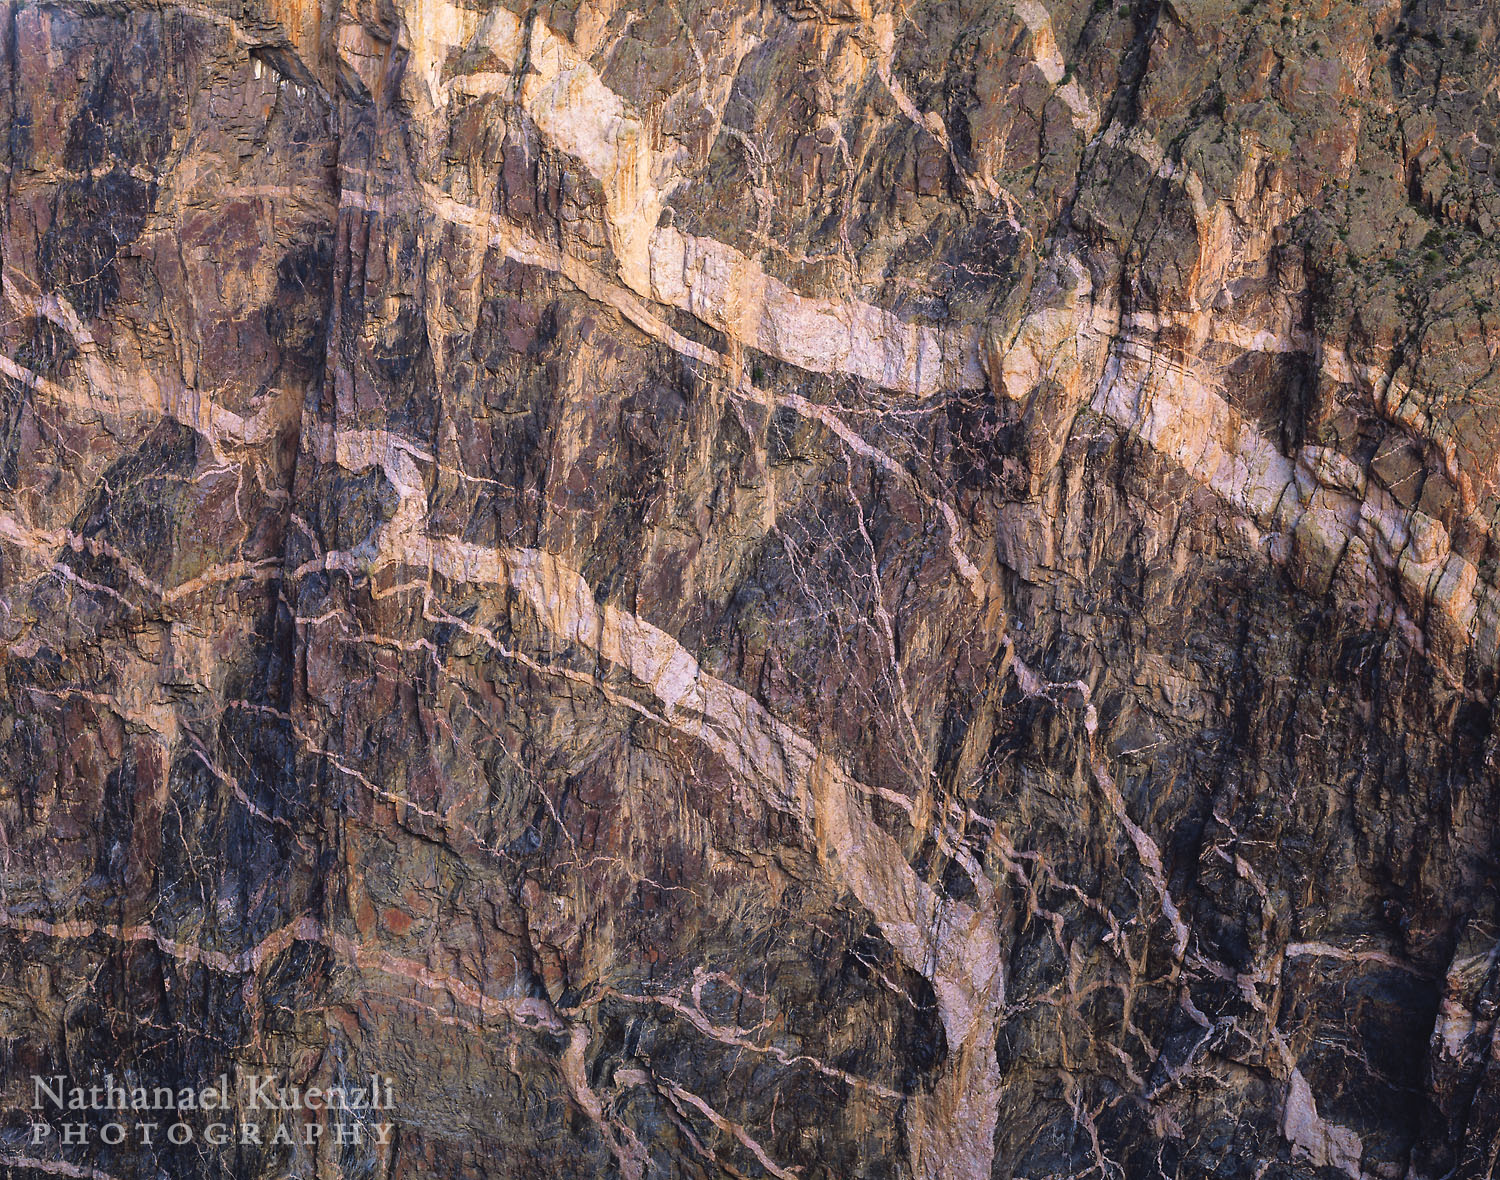   Painted Wall, Black Canyon of the Gunnison National Park, Colorado, May 2004  